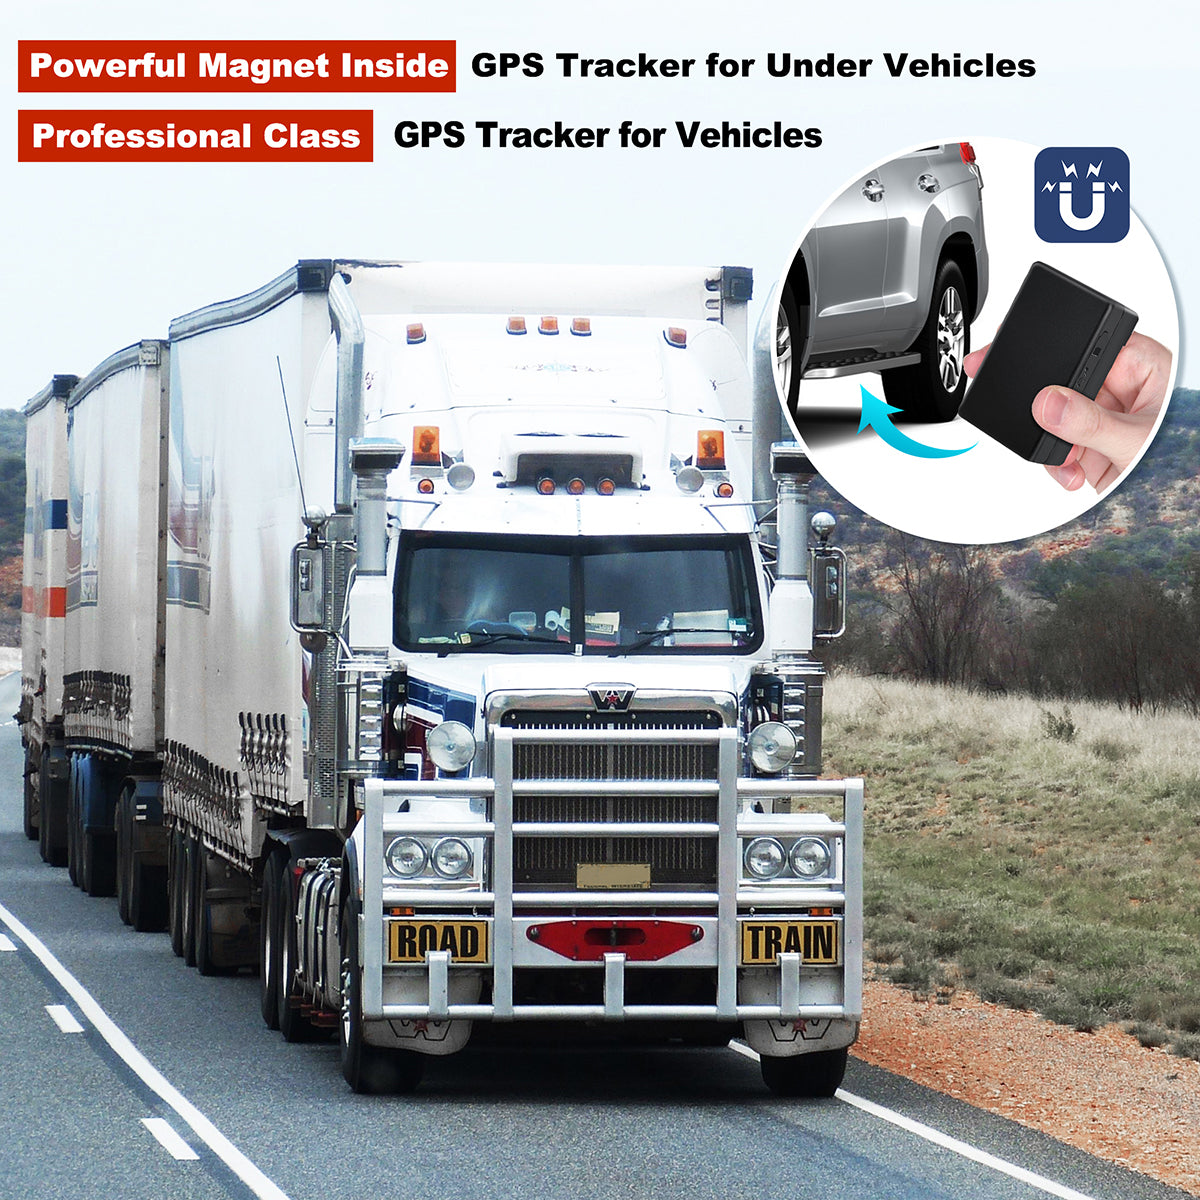 Ablegrid® AB Series GPS Tracker for Vehicles, Real-time GPS Tracking Device Small Hidden GPS Locator for Vehicle, Car, Personal w/ Global SIM Card